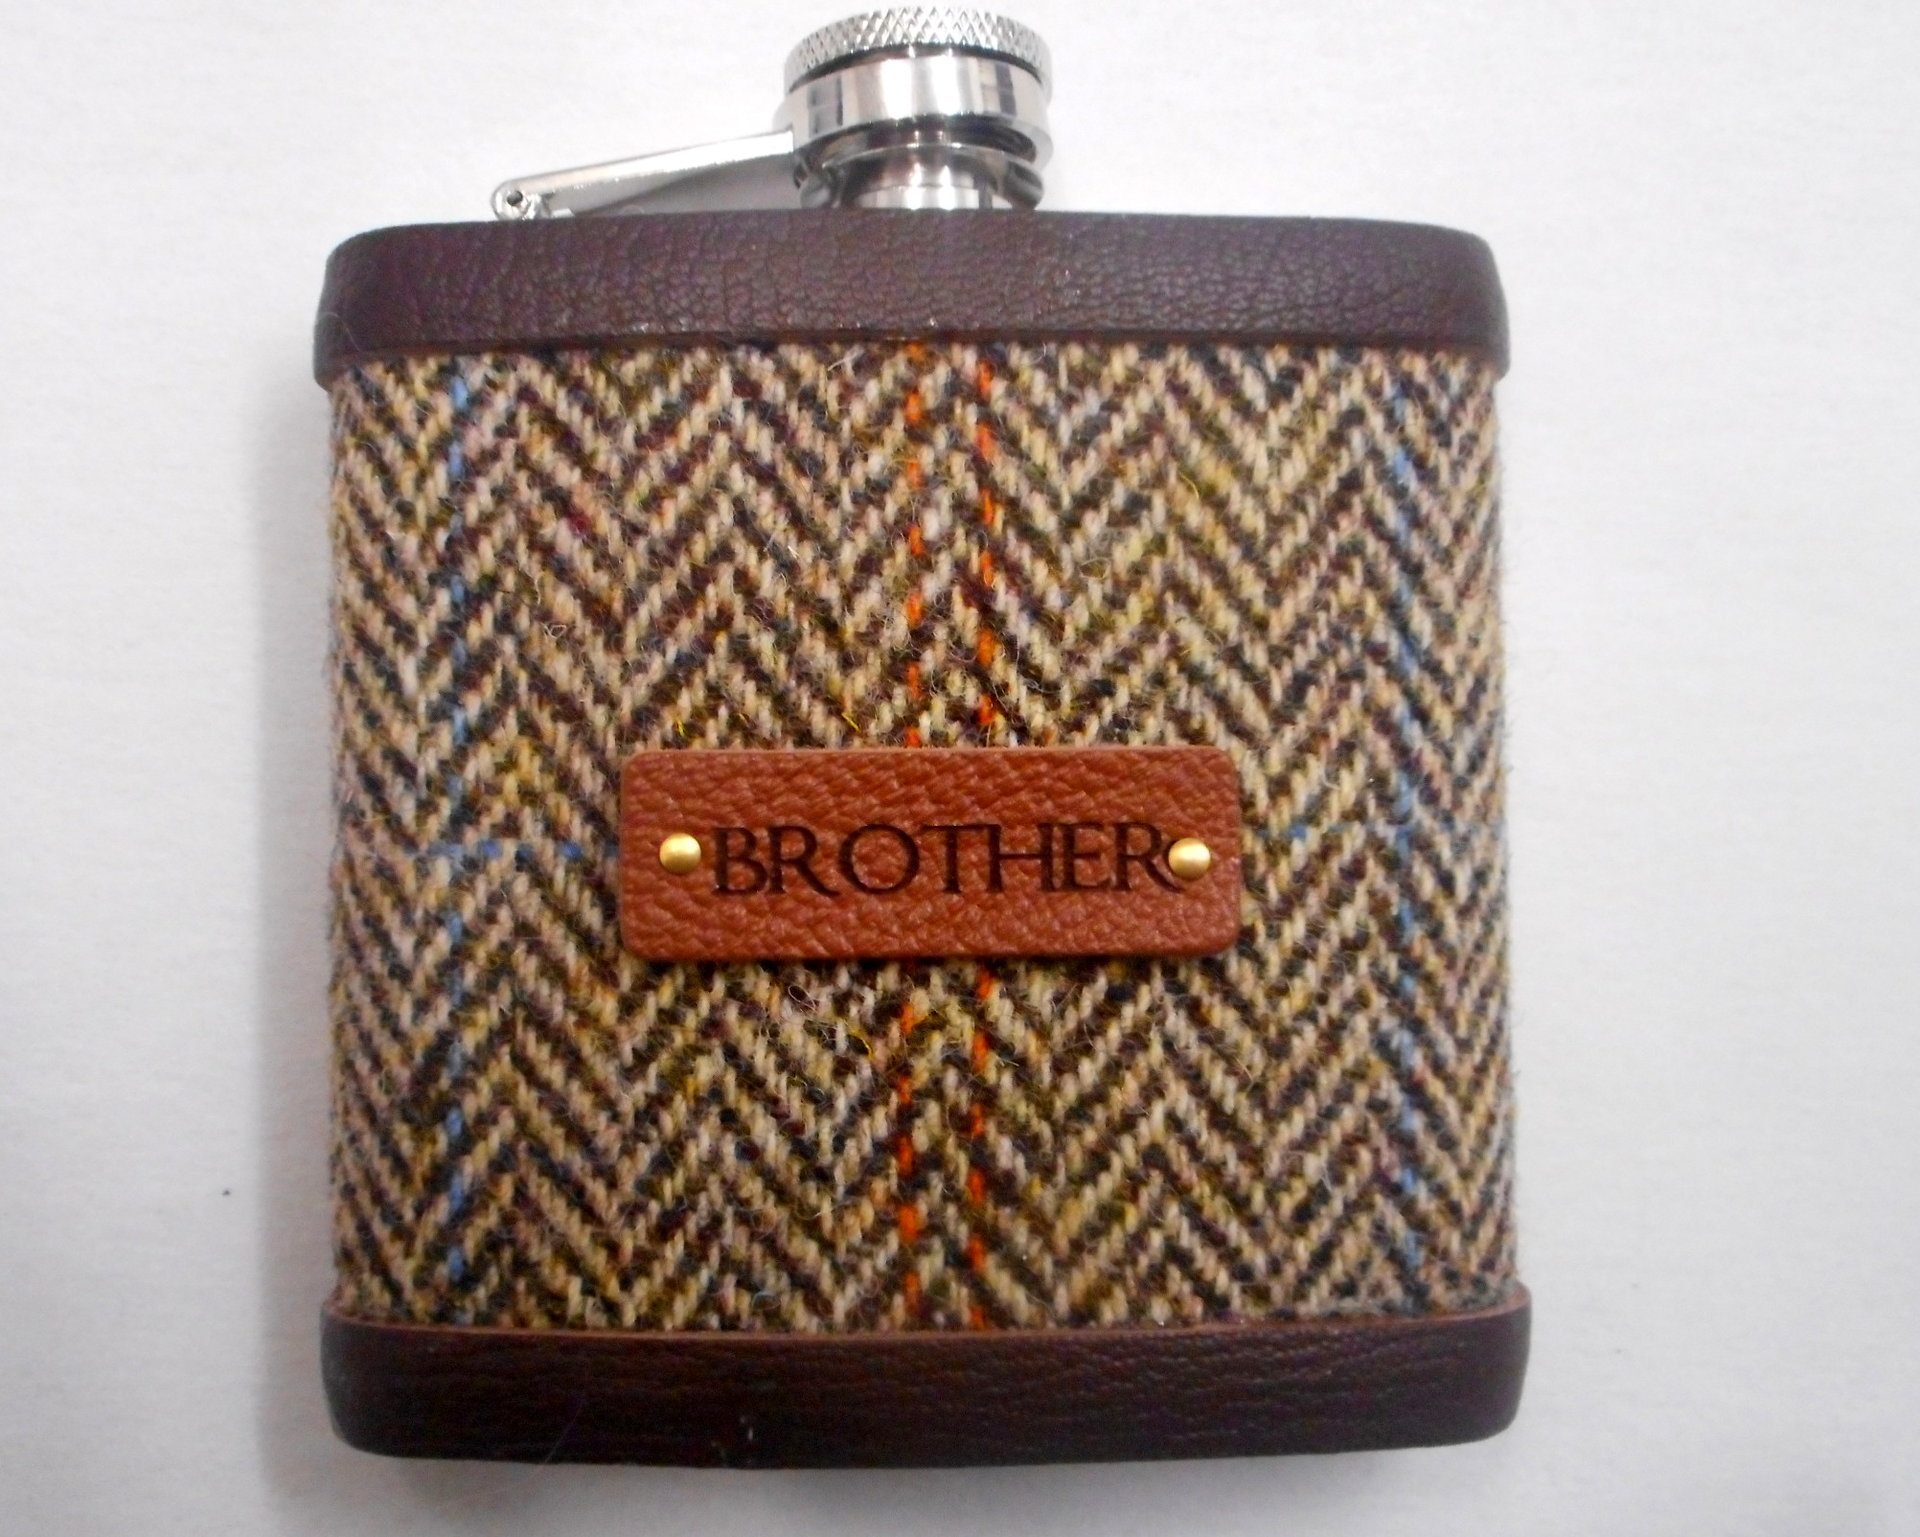 Gift for Brother Harris Tweed hip flask , Scottish luxury gift for Christmas , birthday with real leather label choose any tweed